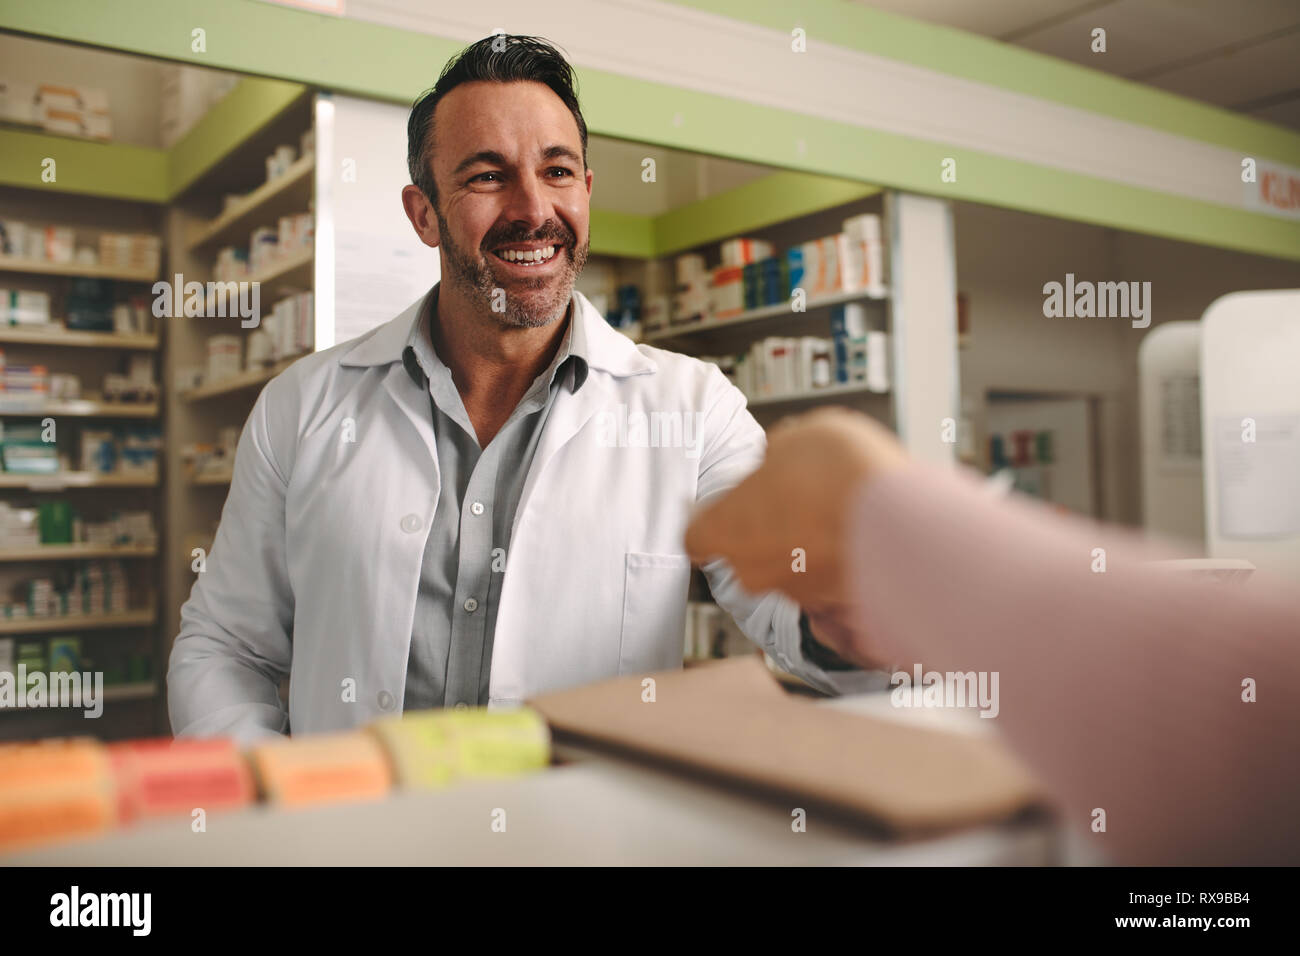 Customer handing a medical prescription to the smiling male chemist standing behind counter. Chemist taking prescription from customer at drugstore. Stock Photo